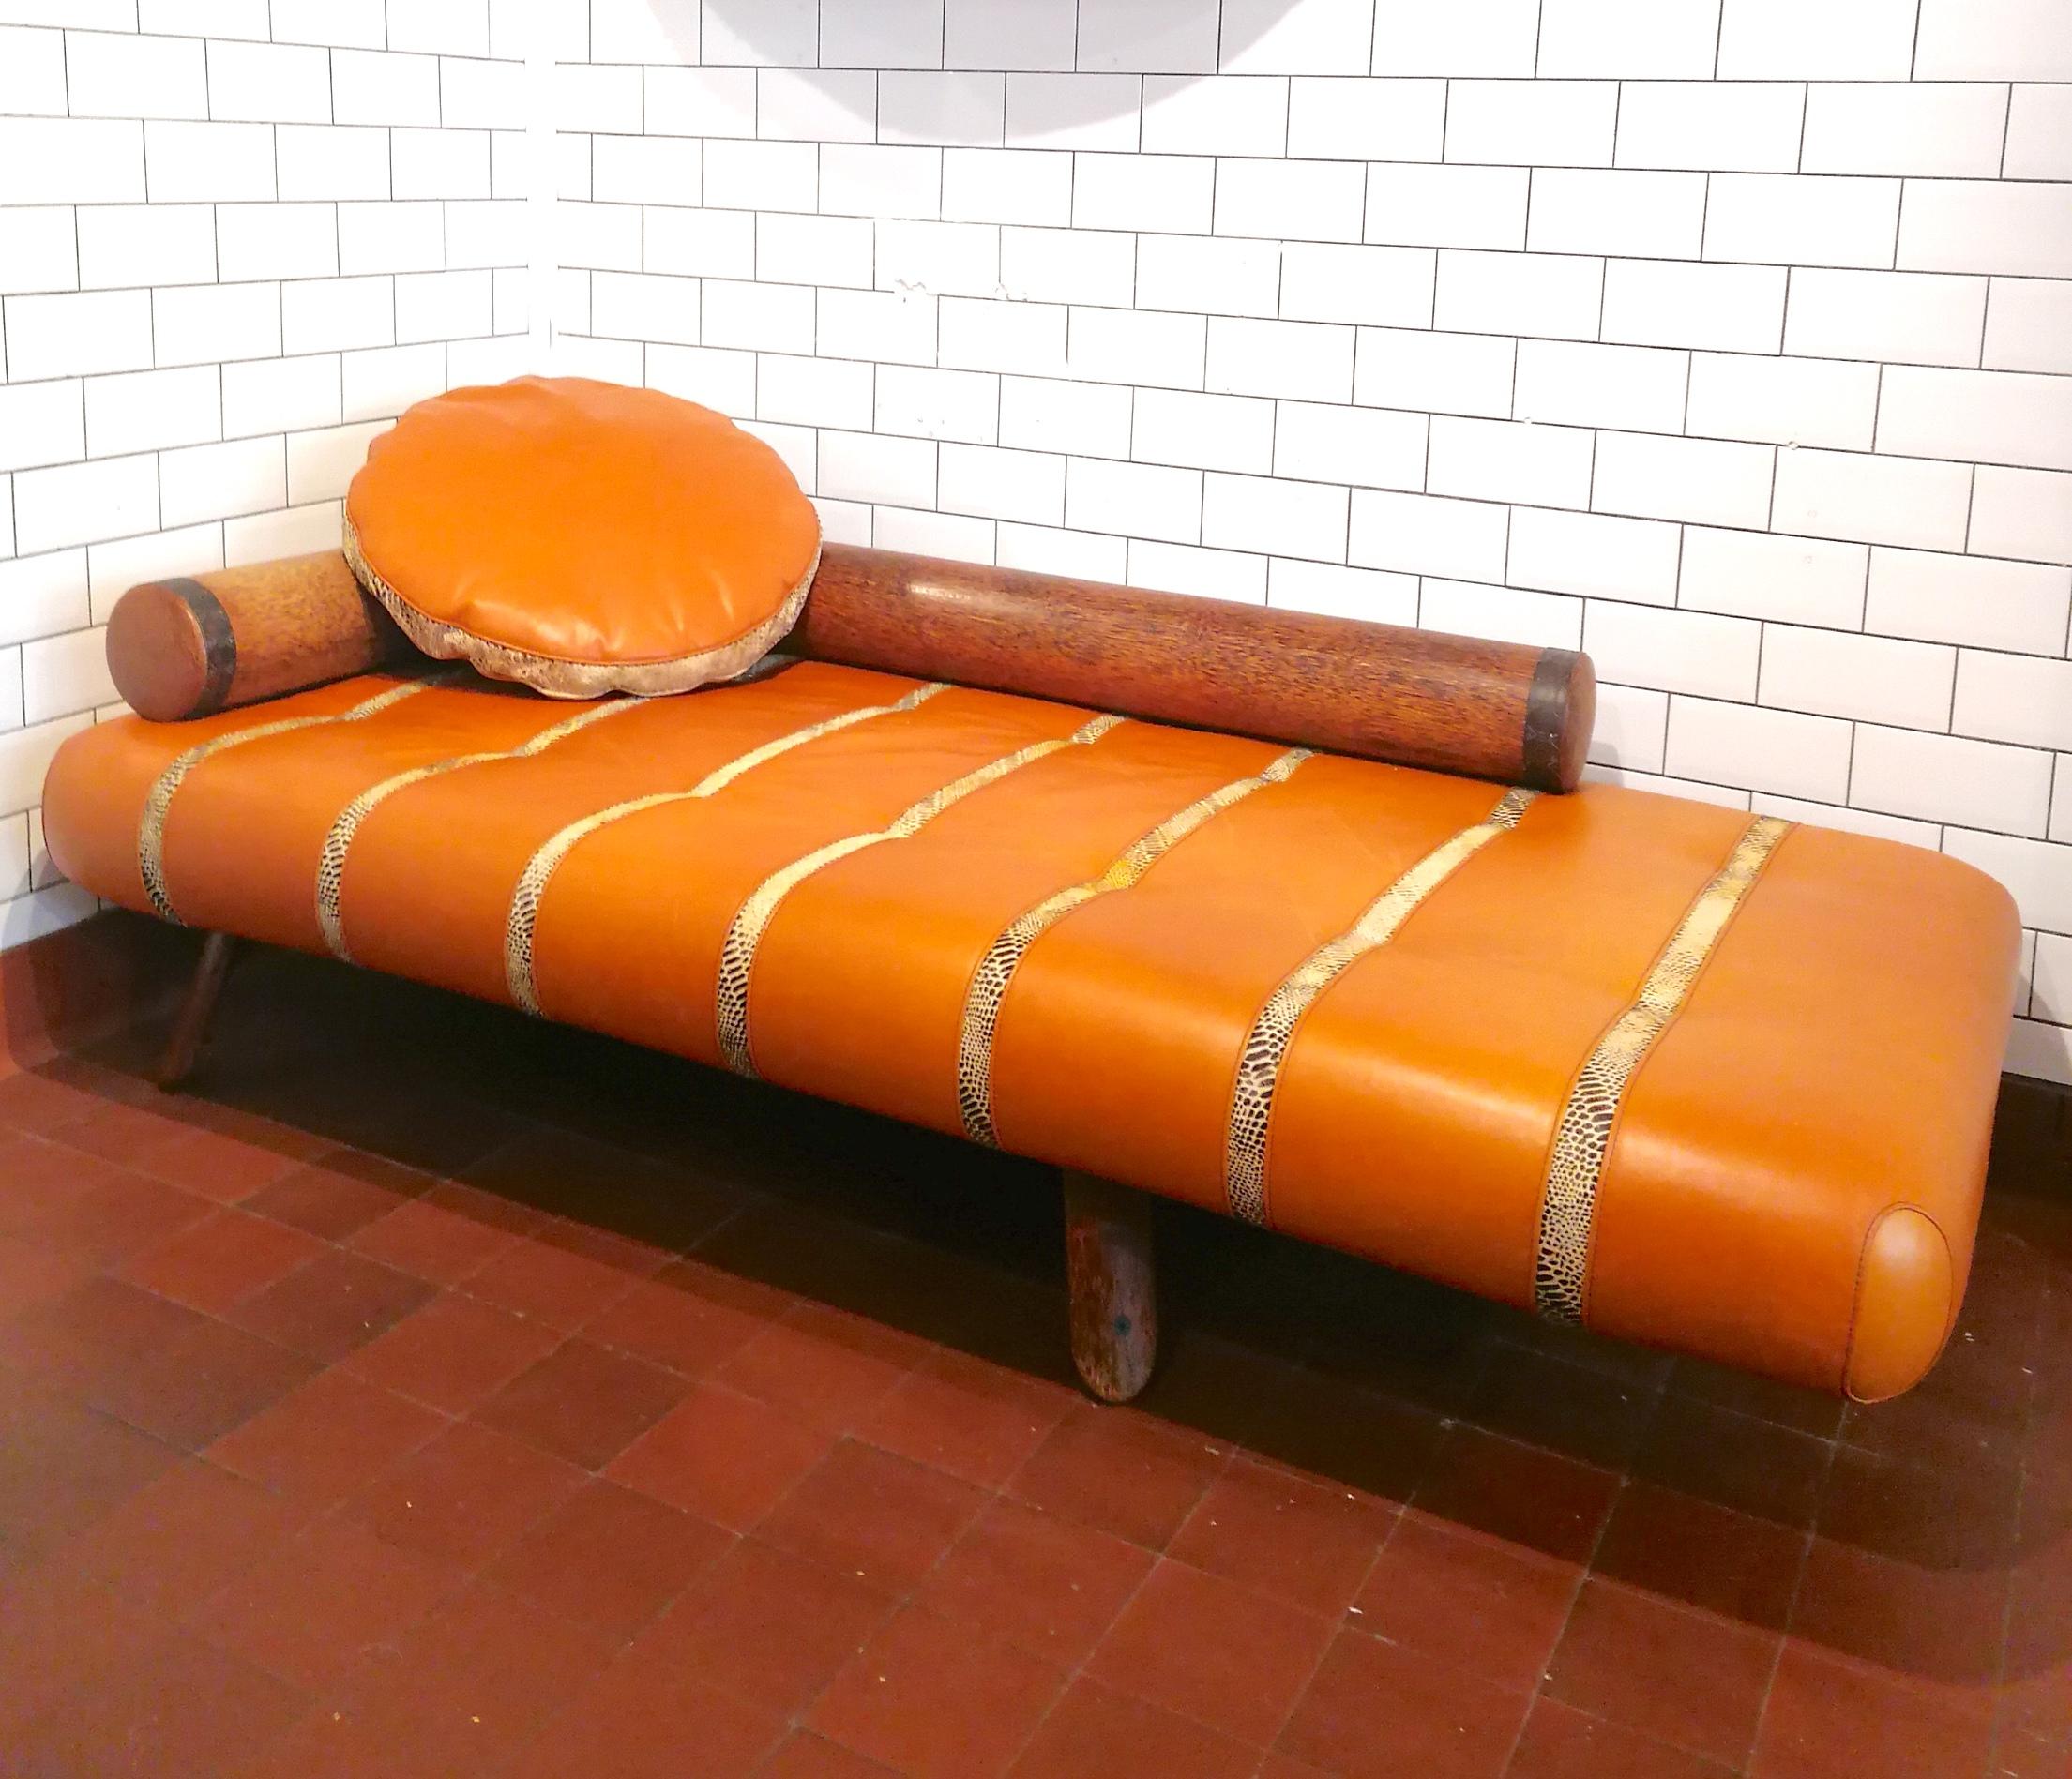 Bohemian Rare vintage postmodern leather & palmwood daybed by Pacific Green, c1990s For Sale